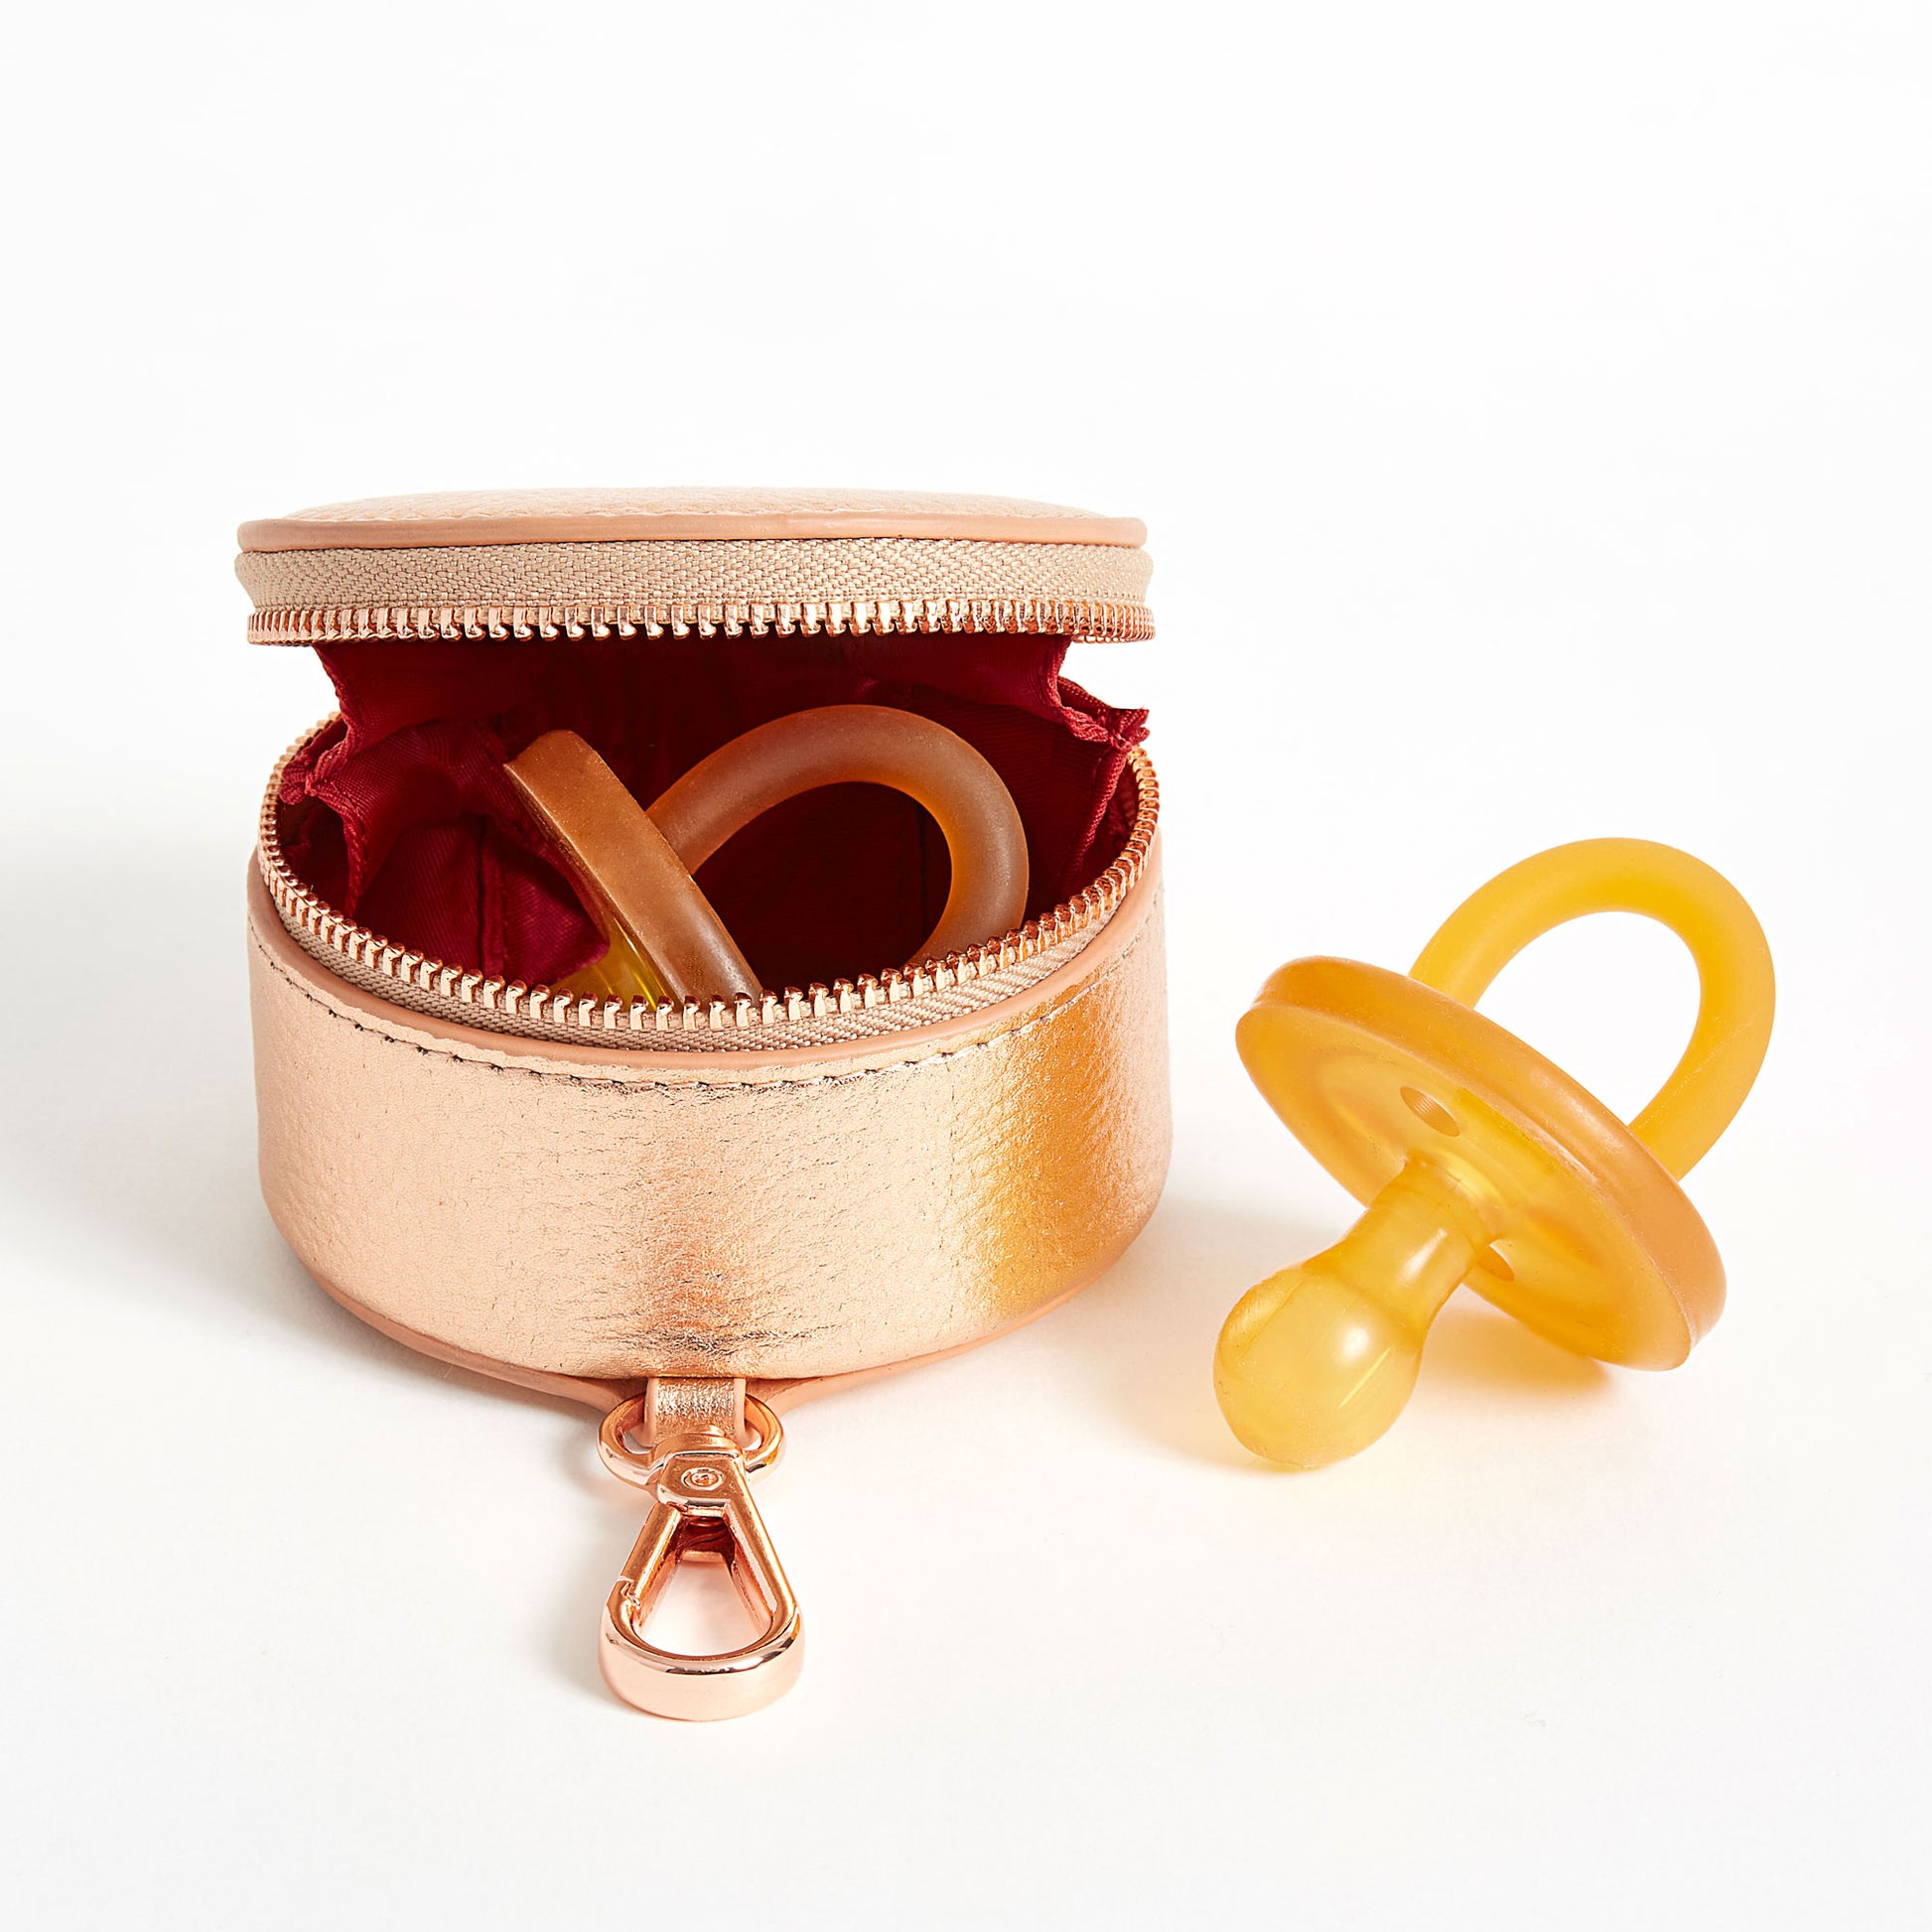 Leather dummy pacifier case and coin purse